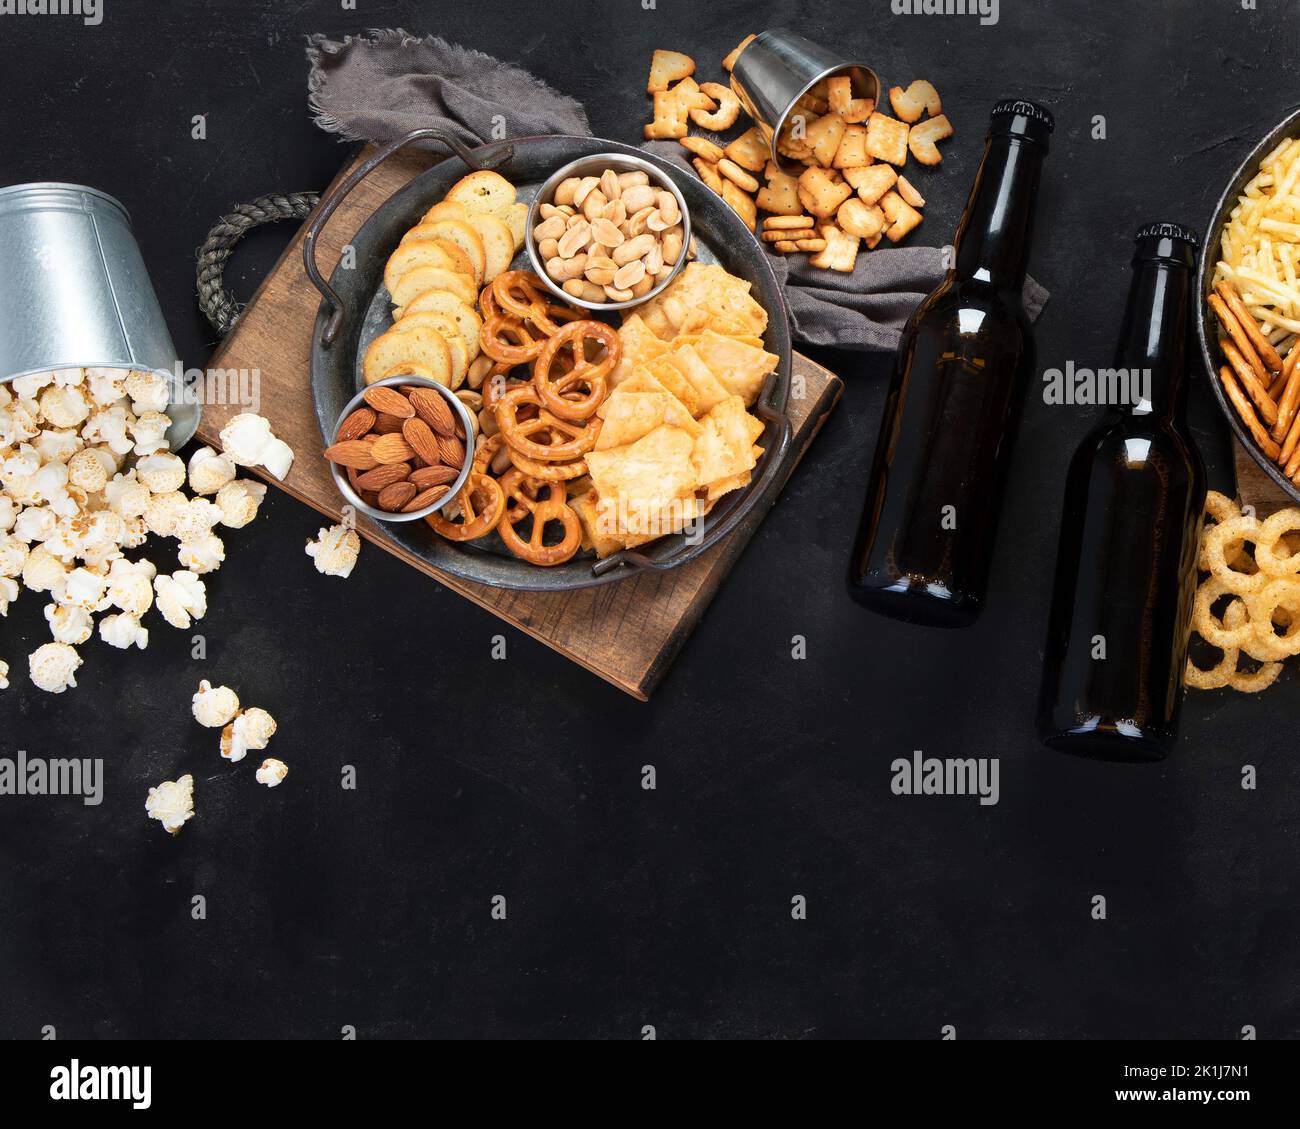 Assortment of beer and salty snacks on dark background. Party food concept. Top view, copy space Stock Photo